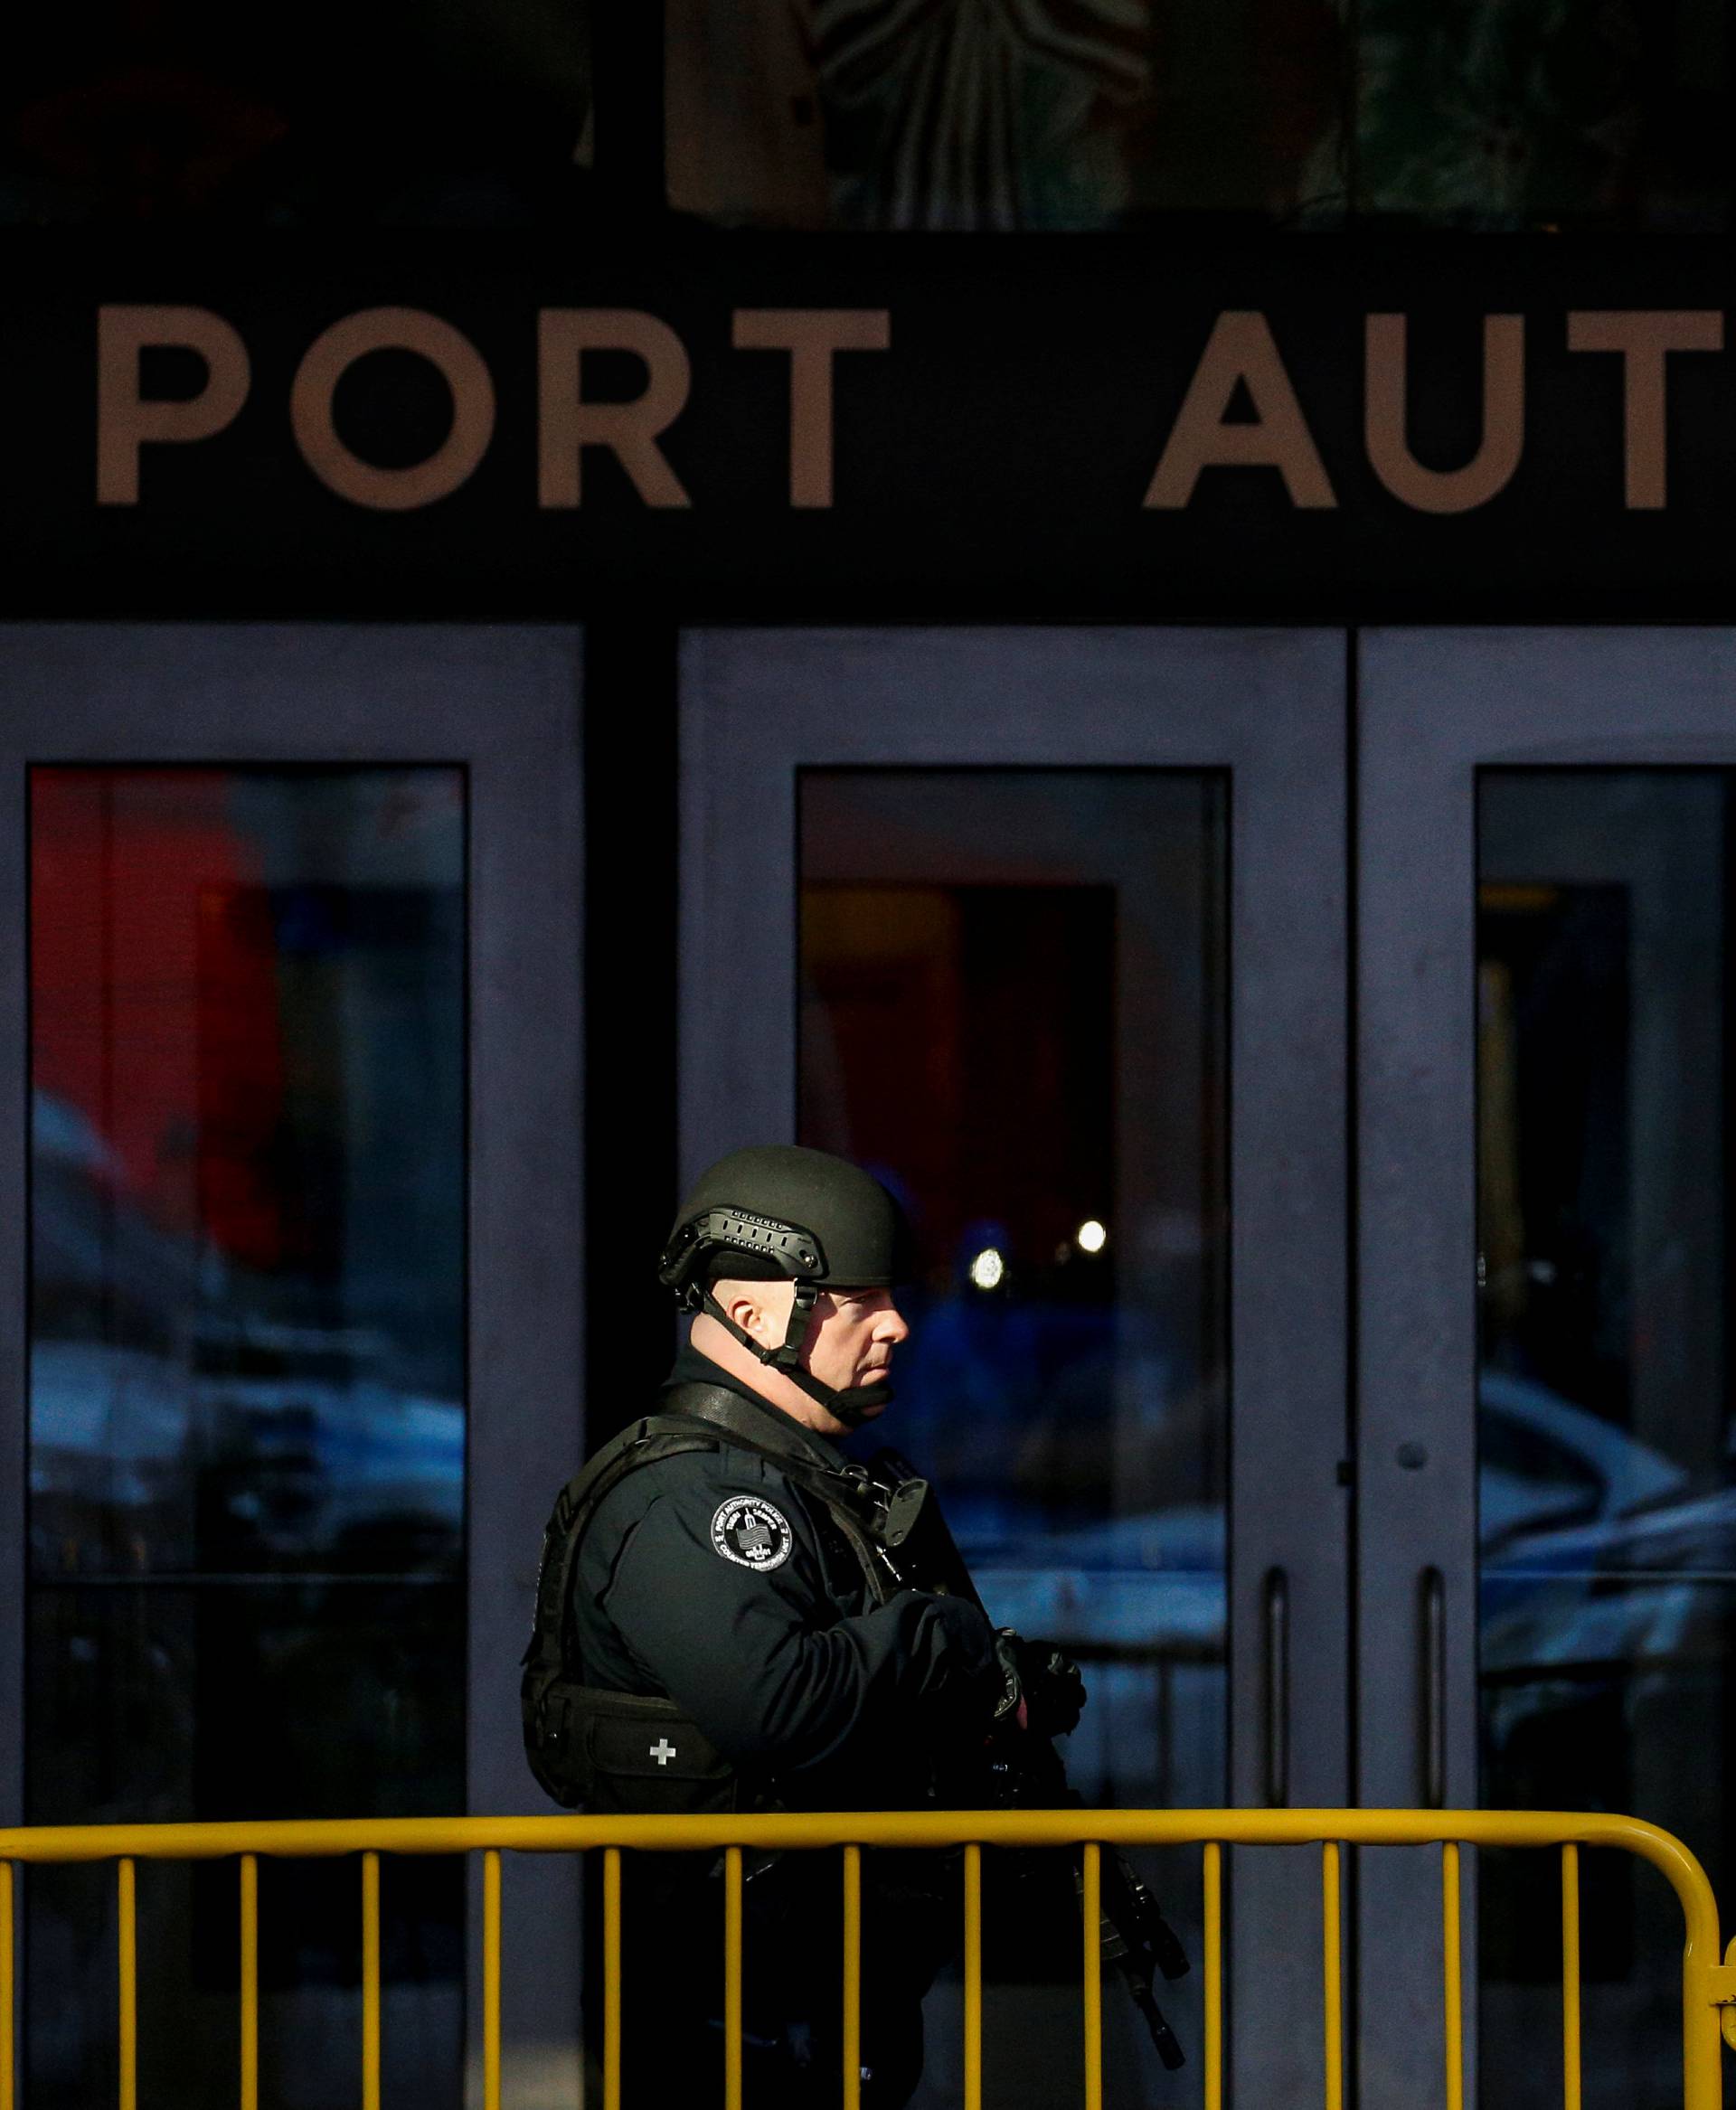 NYPD officer stands outside the New York Port Authority Bus Terminal, after reports of an explosion, in New York City